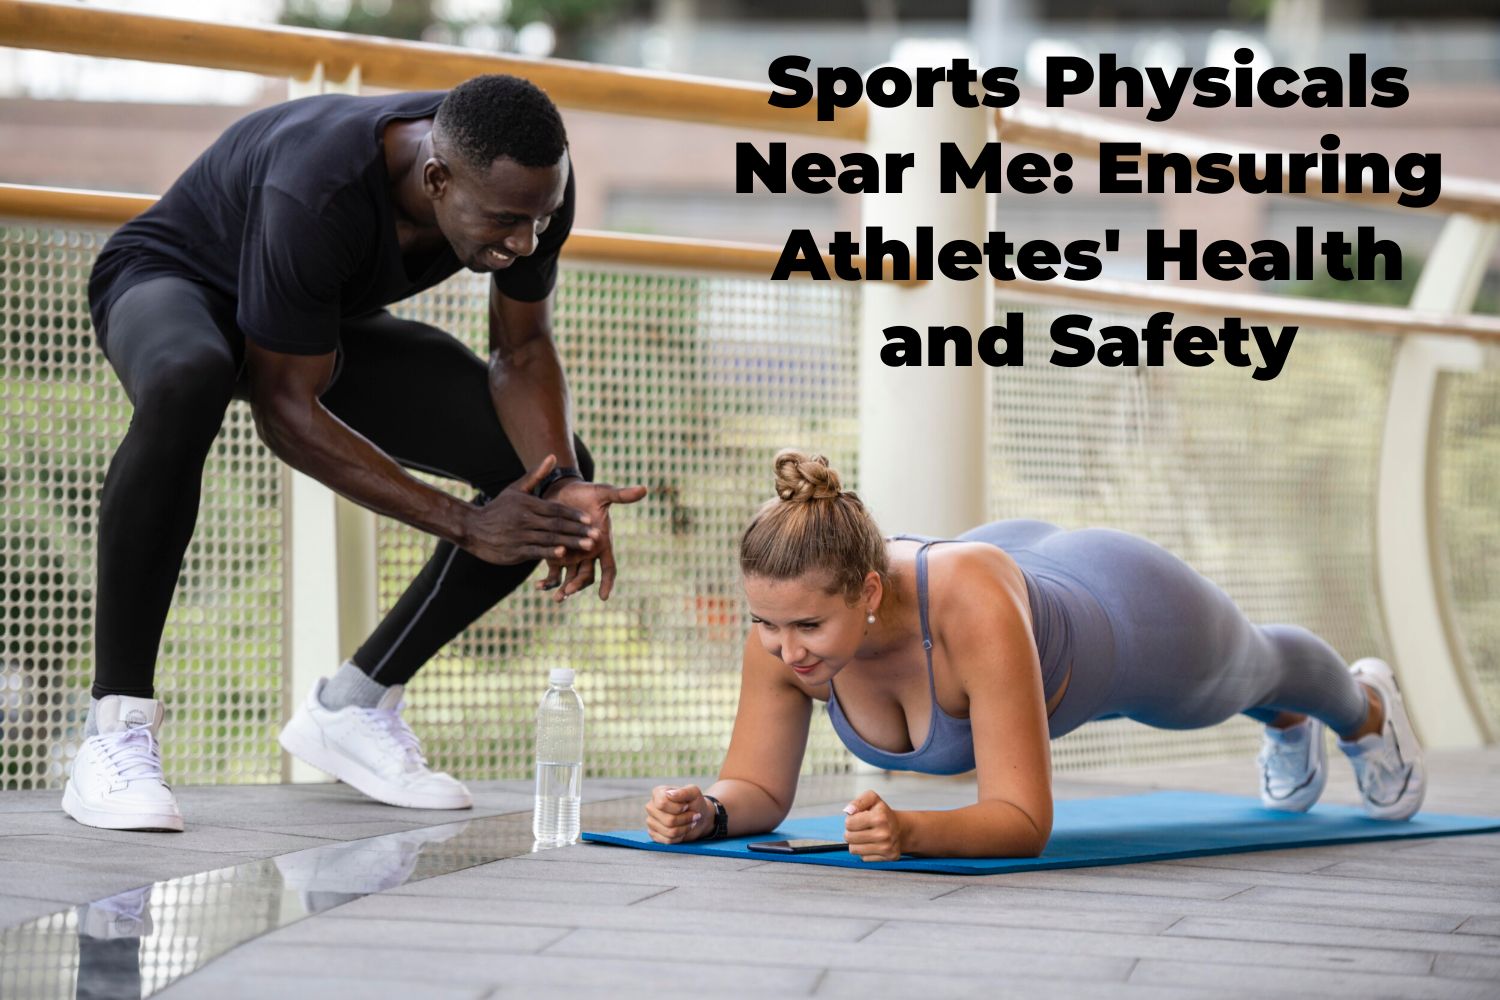 Sports Physicals Near Me